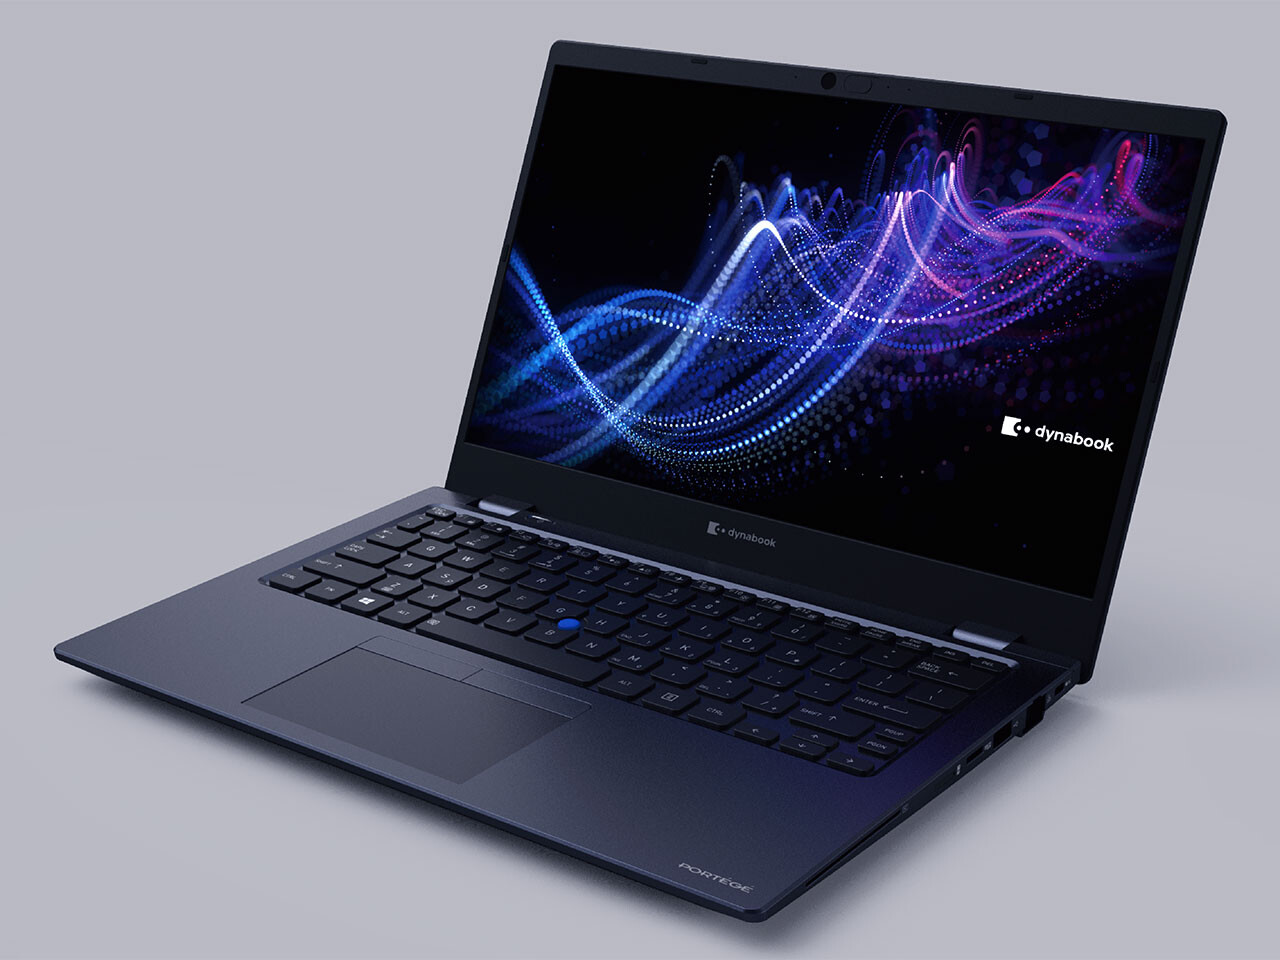 Dynabook Reveals New Featherlight Laptops with 11th Gen Intel Core 